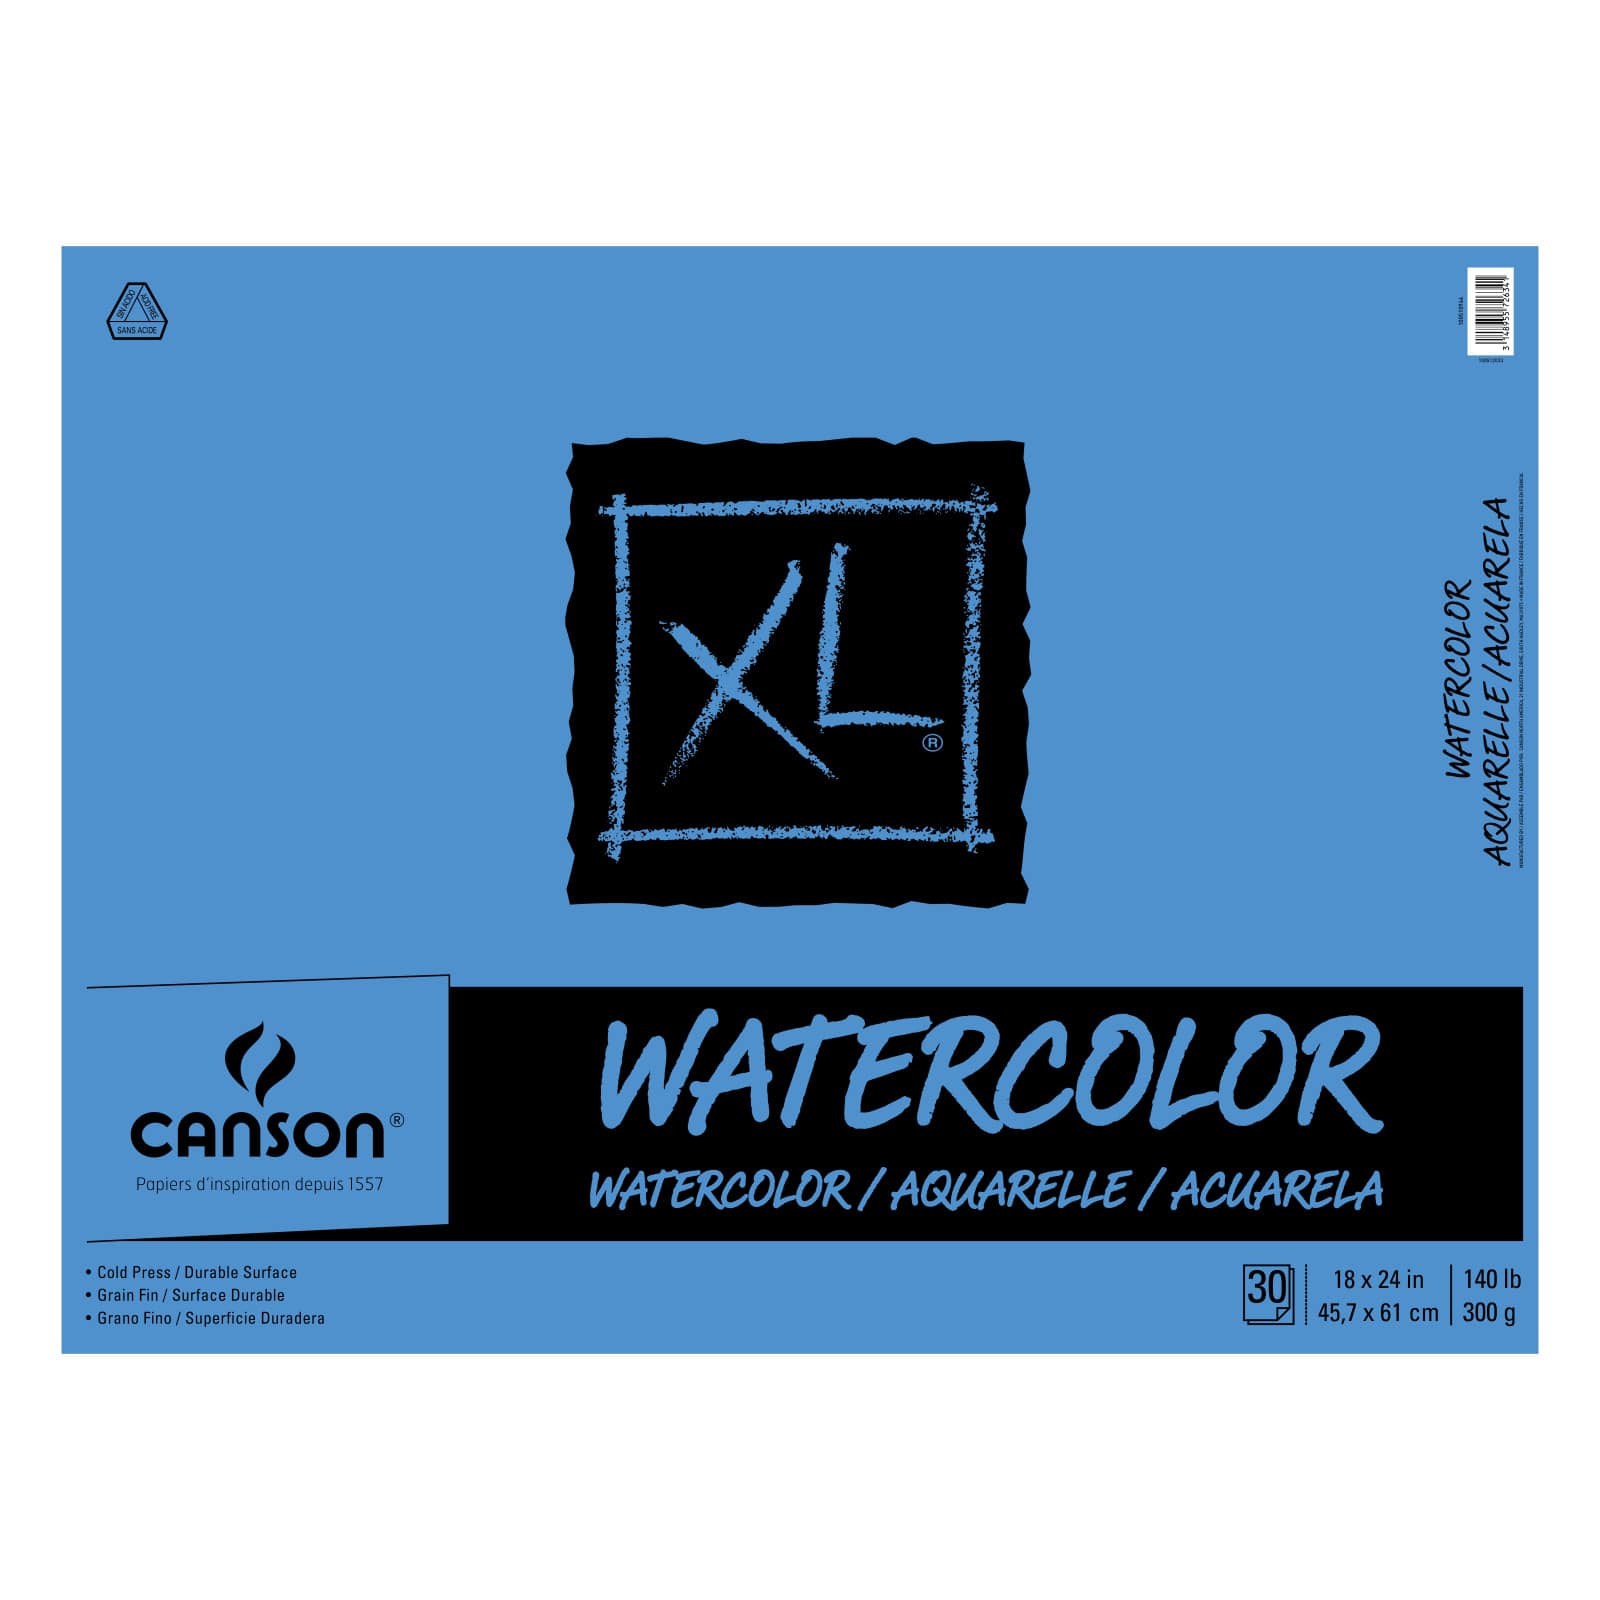 Canson Watercolor Paper Packs